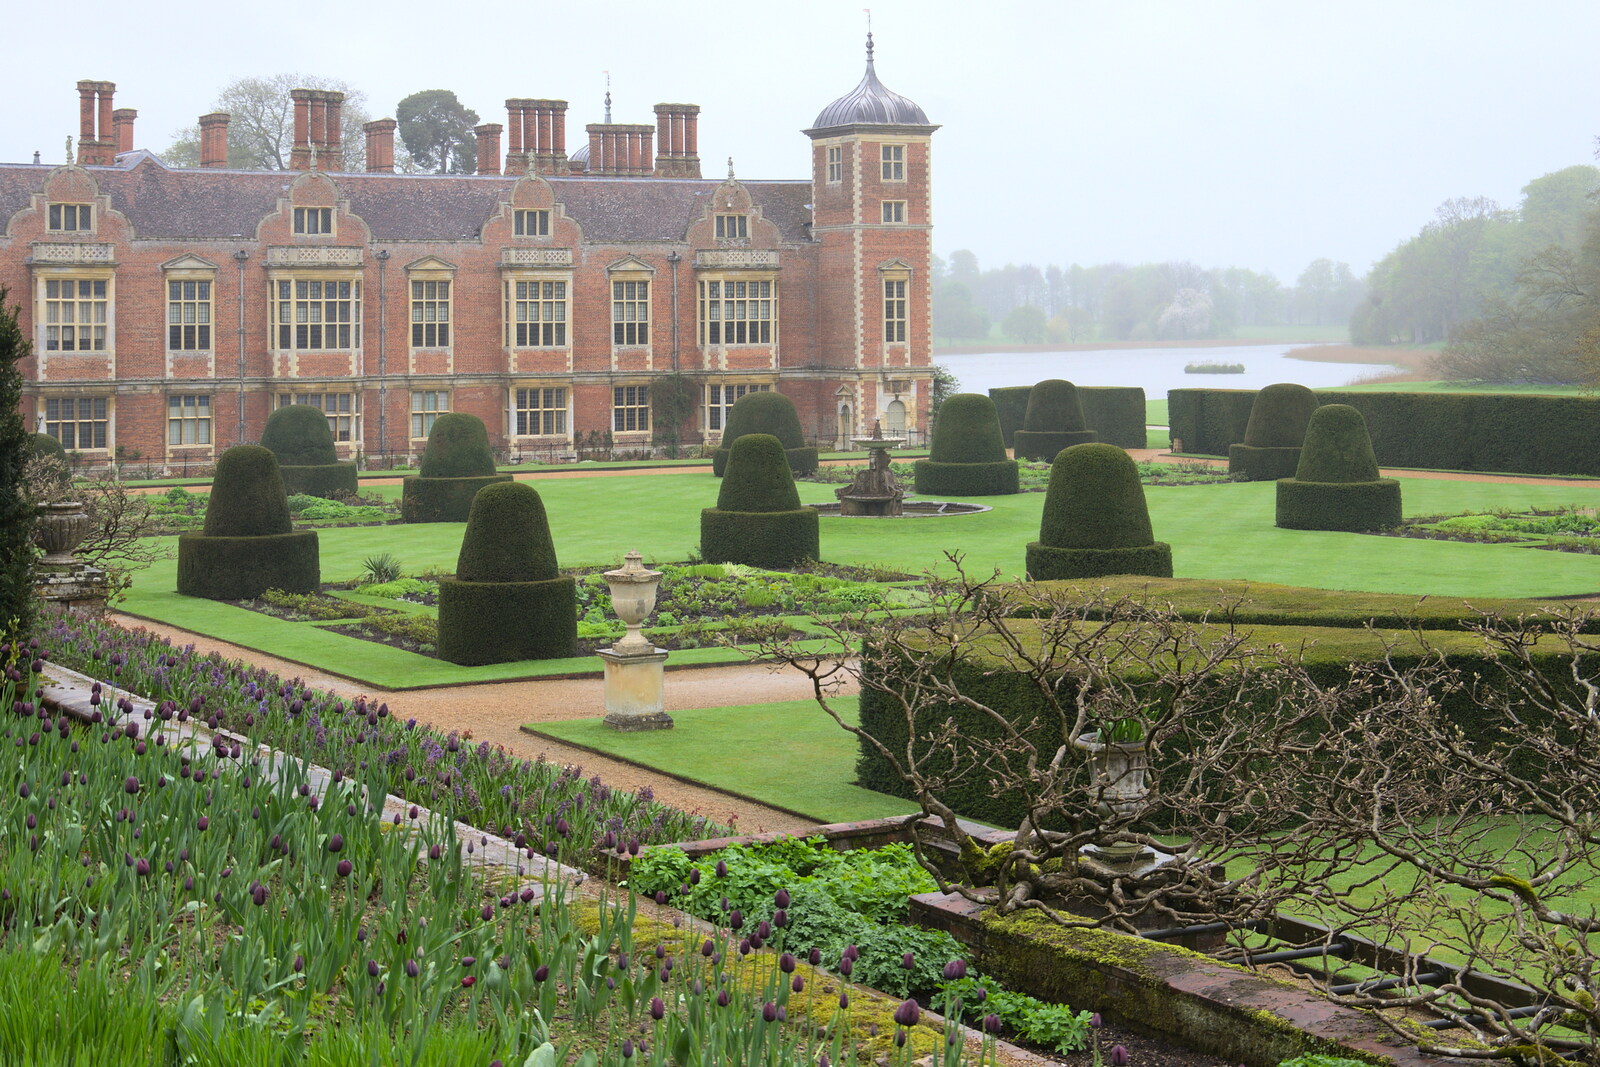 A view over the topiary and Blickling's lake from A Trip to Blickling Hall, Aylsham, Norfolk - 29th April 2018